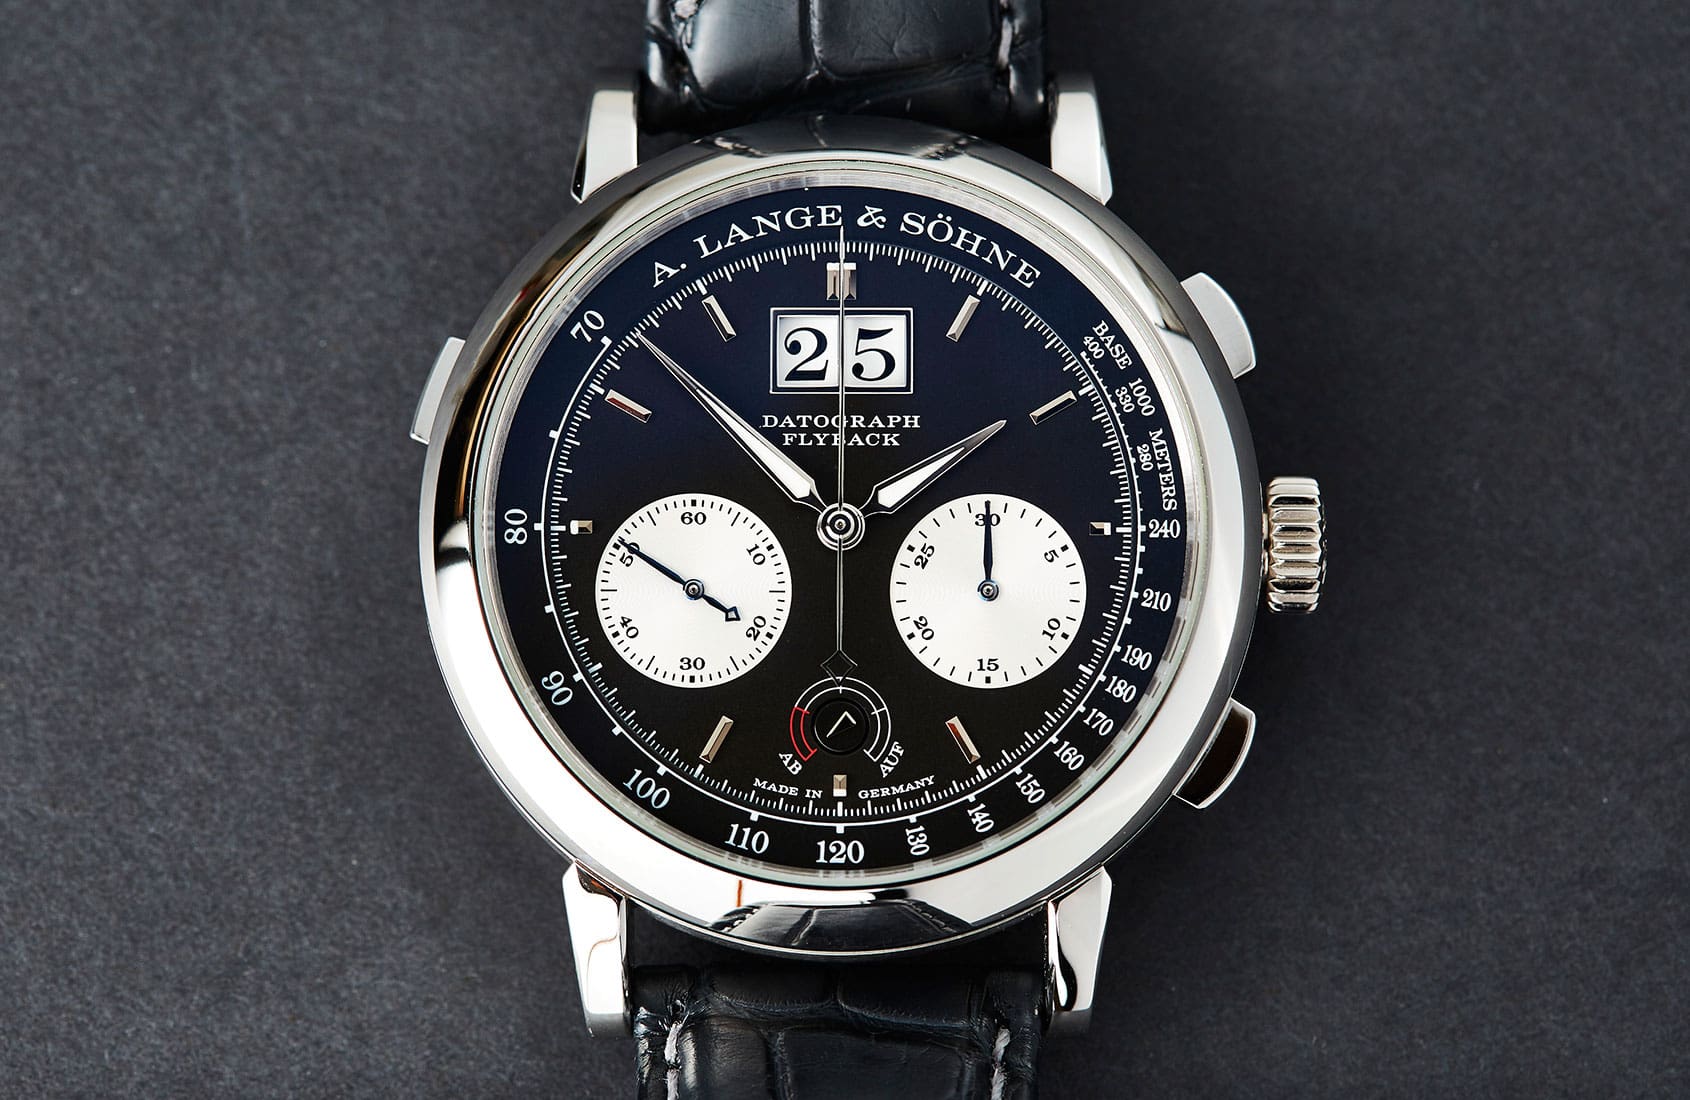 EDITOR’S PICK: The greatest chronograph of our times? The rise and rise of the A. Lange & Söhne Saxonia Datograph Up/Down